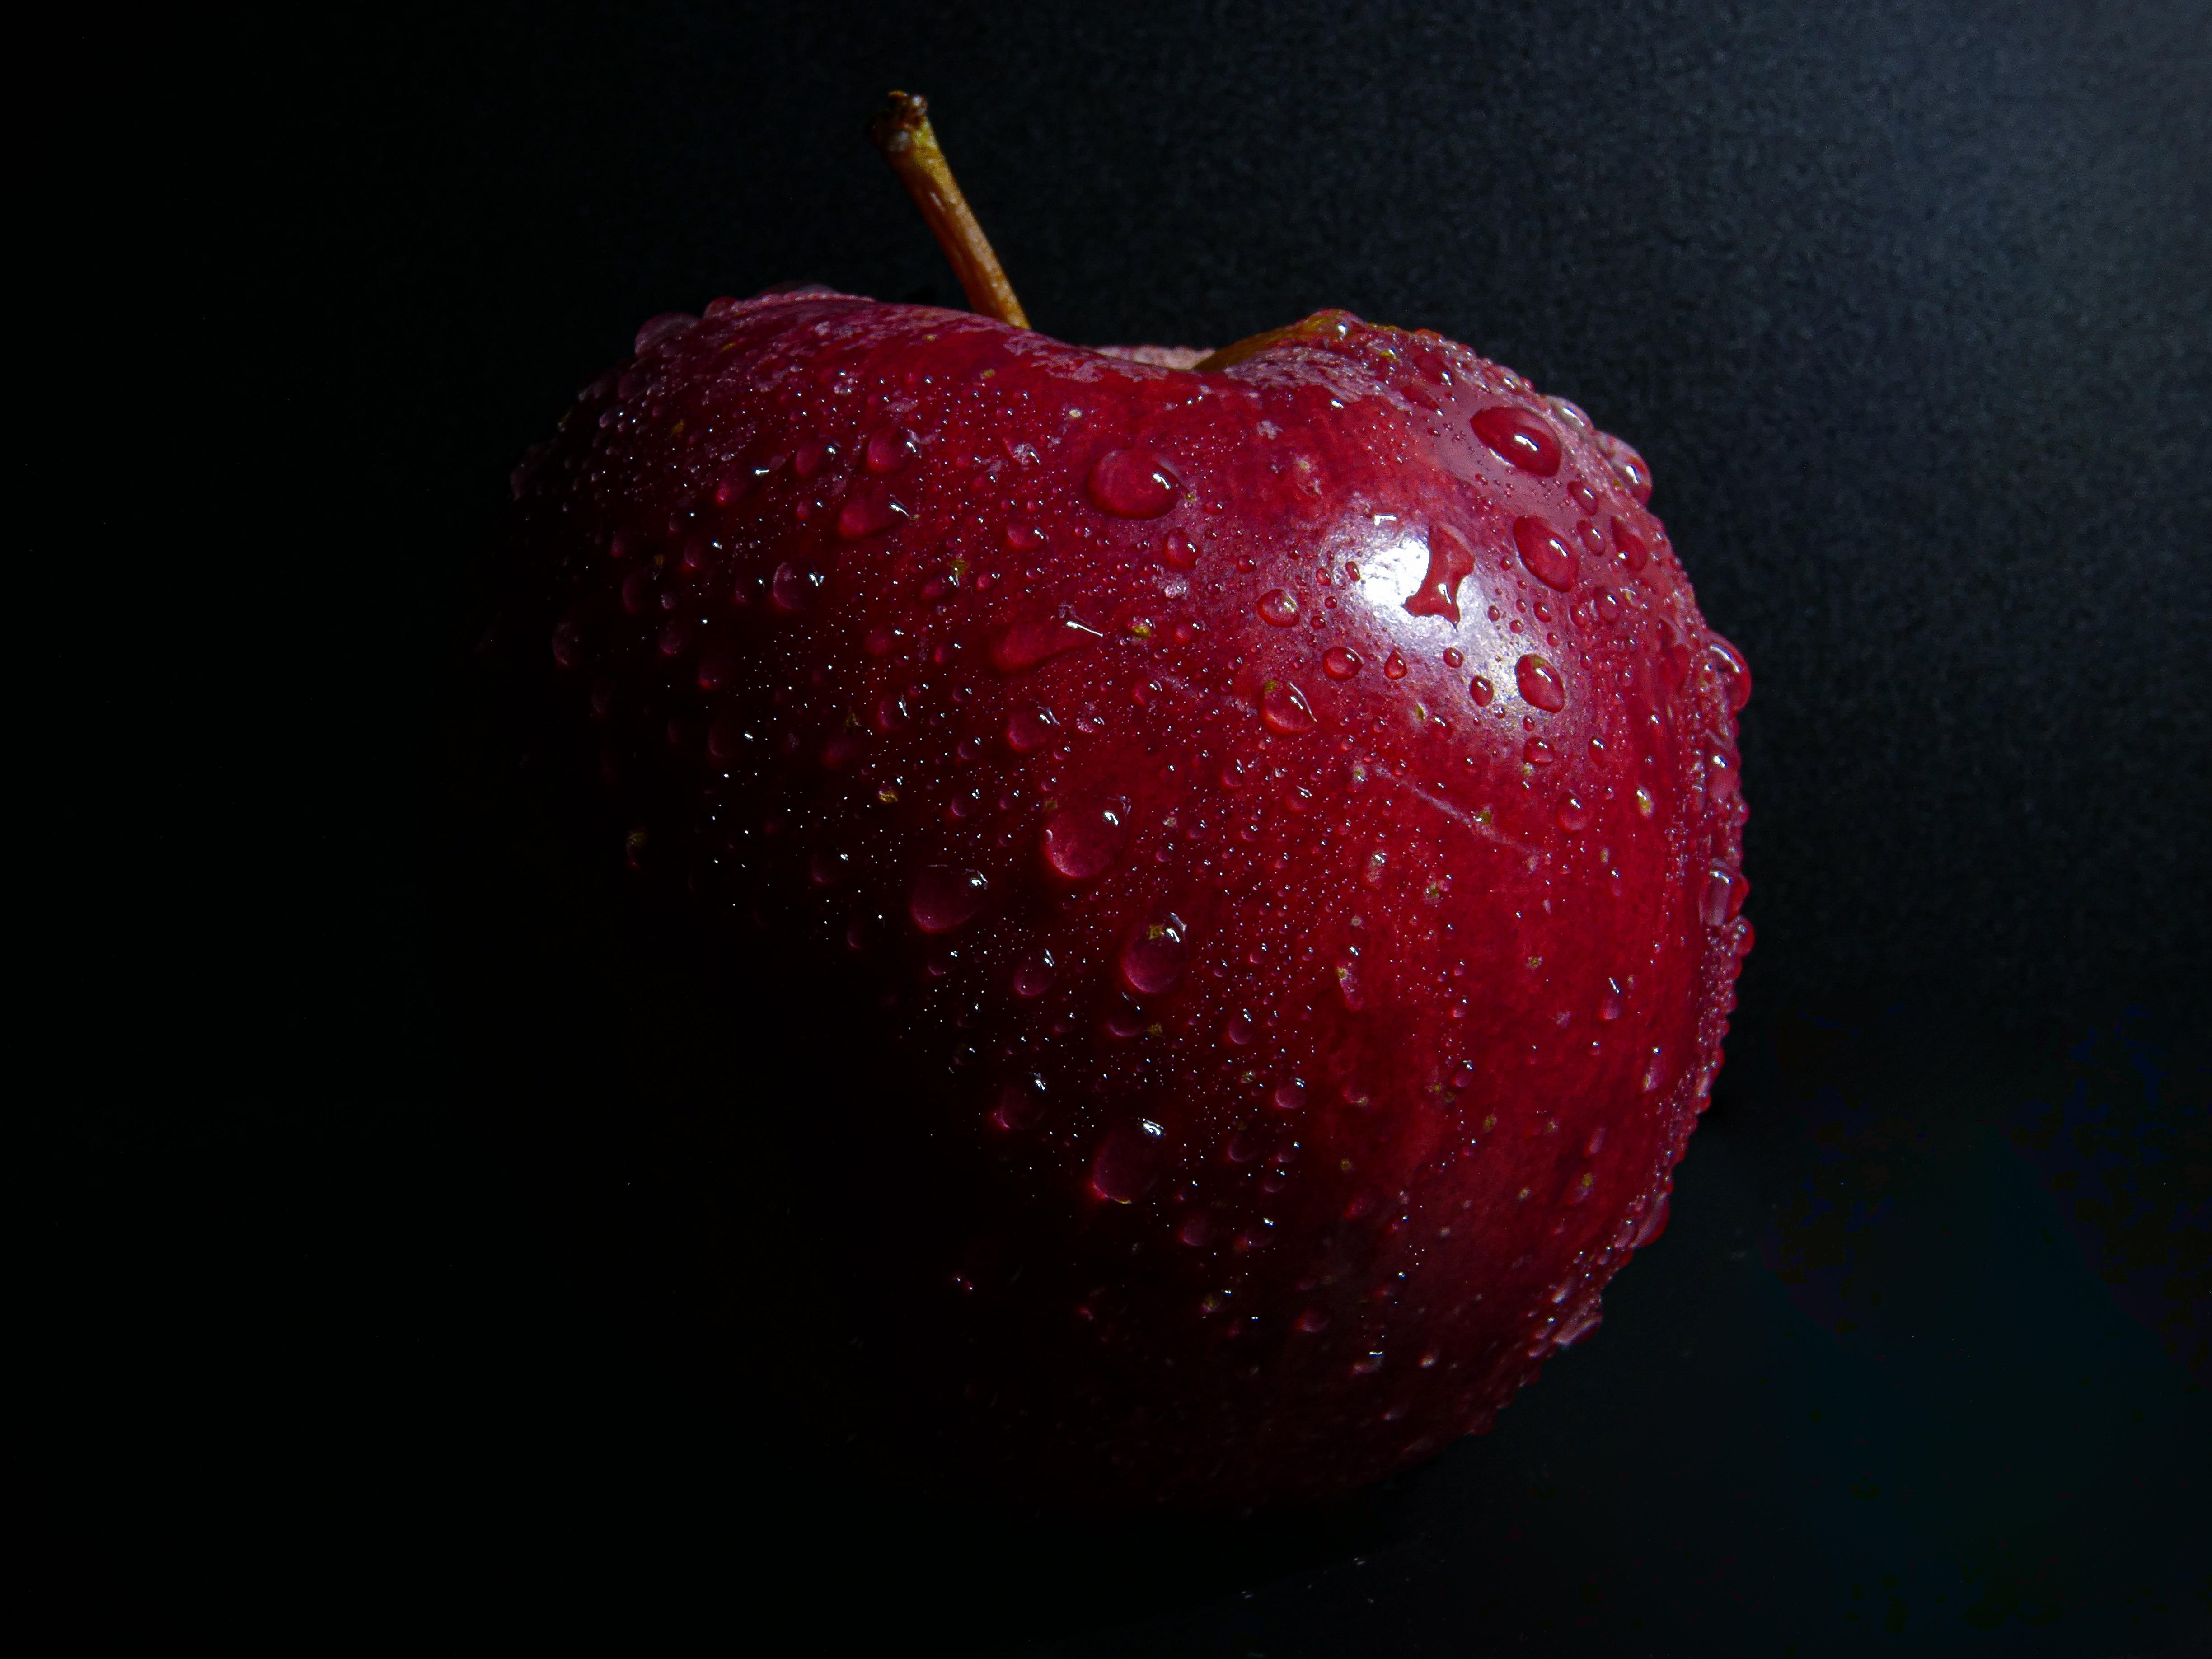 I'm doing compositional techniques in photography class right now and I took this really cool photo of an apple with water on it | image tagged in share your own photos | made w/ Imgflip meme maker